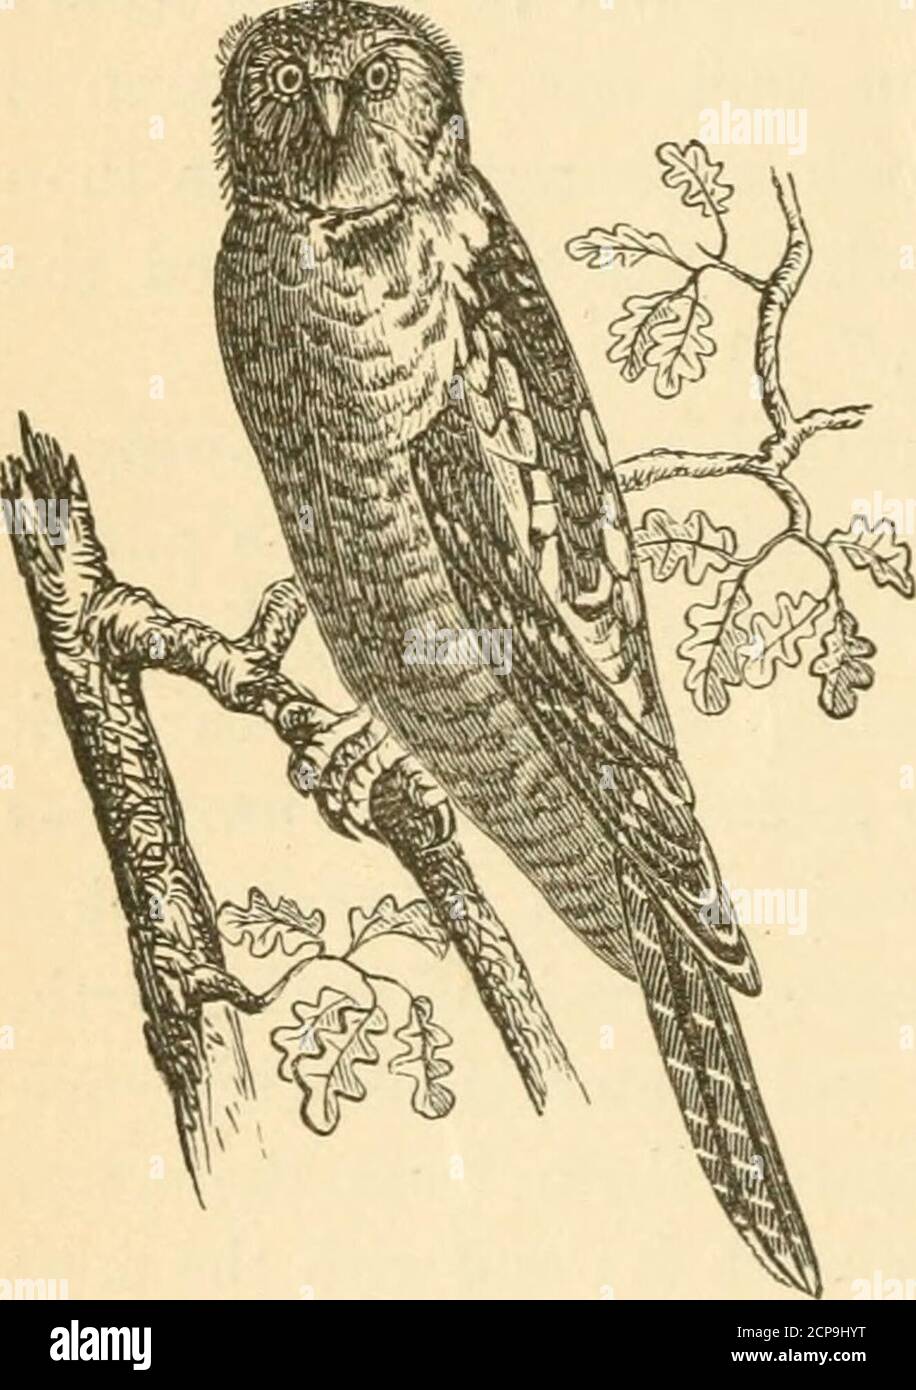 . Our own birds : a familiar natural history of the birds of the United States . ave been the favorite Hawk among the fal-coners of the olden time. In the early part of Euro-pean history mention is frequently made of the sportof hawking, and it was then considered as a recrea-tion of such a dignified character, that it was placedby laws beyond the power of any but the nobility toengage in it. The various nobles vied with eachother in the superiority and numbers of their Falcons,and the life of a serf is said to have been esteemedof less value in the eyes of a Norman Baron thanthat of his favor Stock Photo